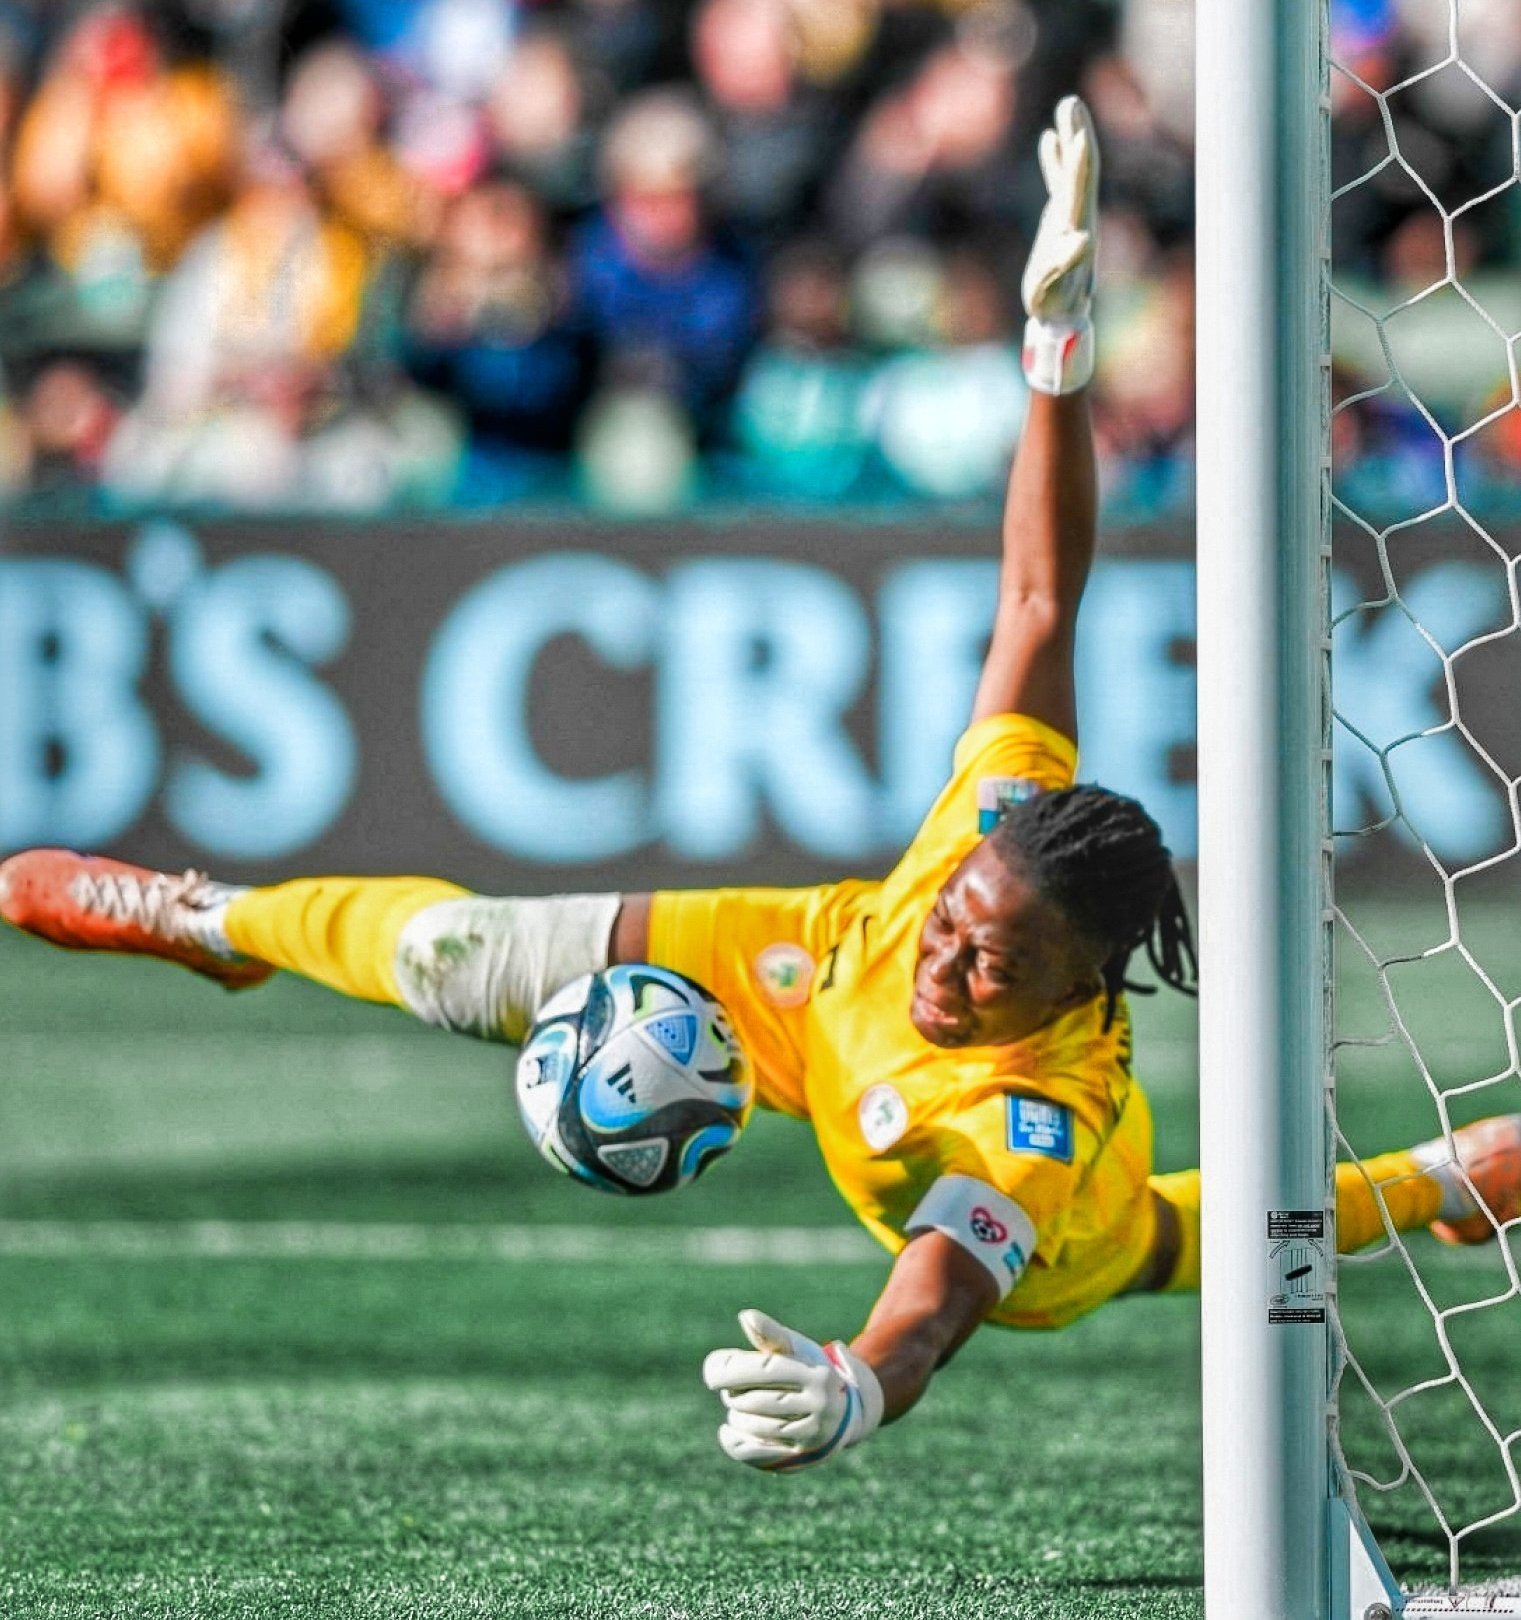 Nigeria vs Canada: Watch moment Nnadozie saved penalty for Super Falcons